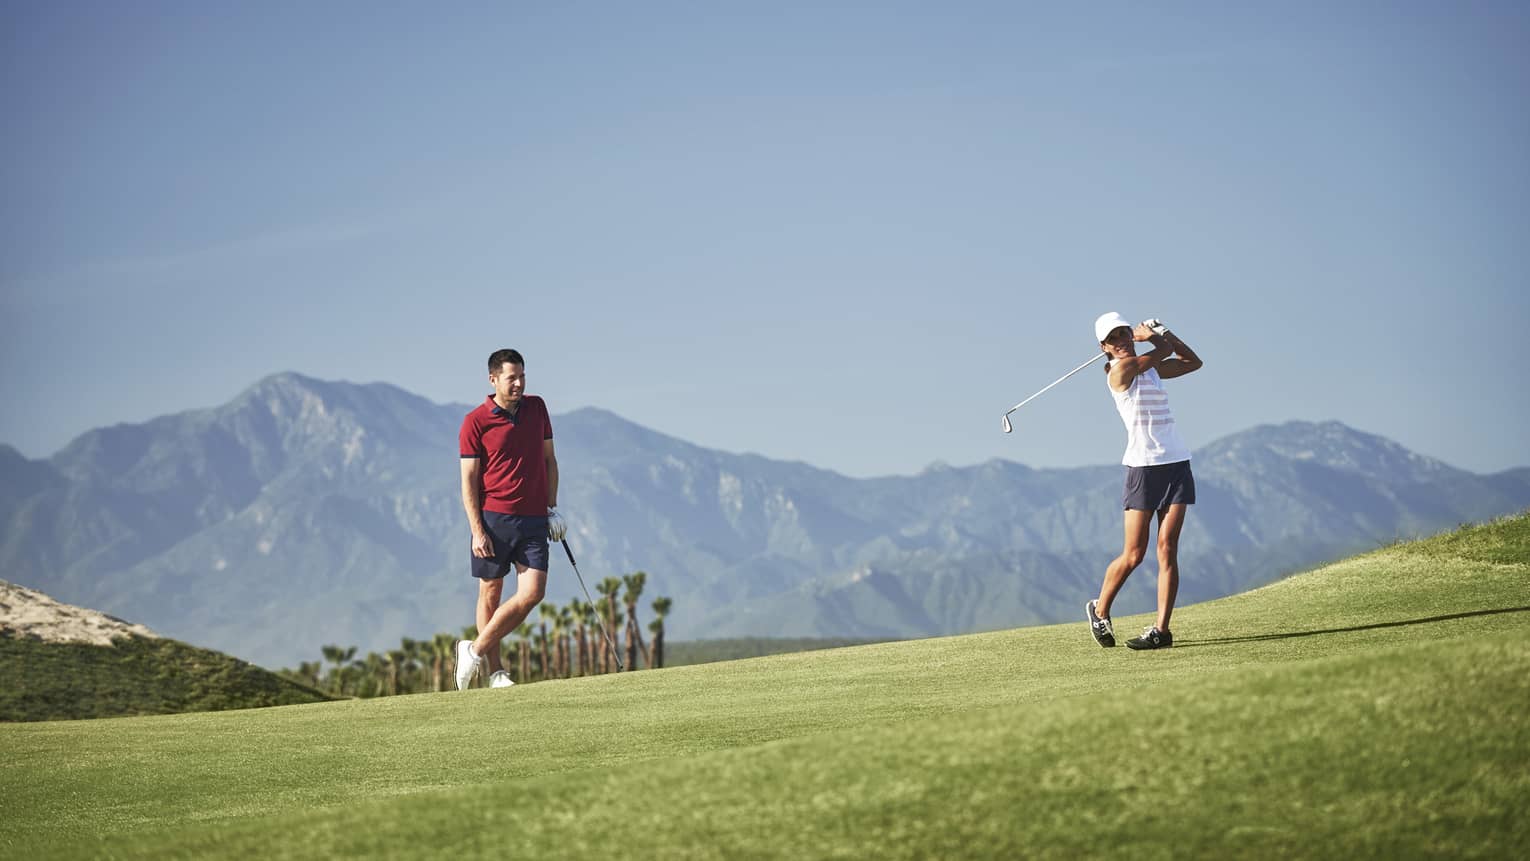 Woman swings golf club as man watches on green course, mountains in background